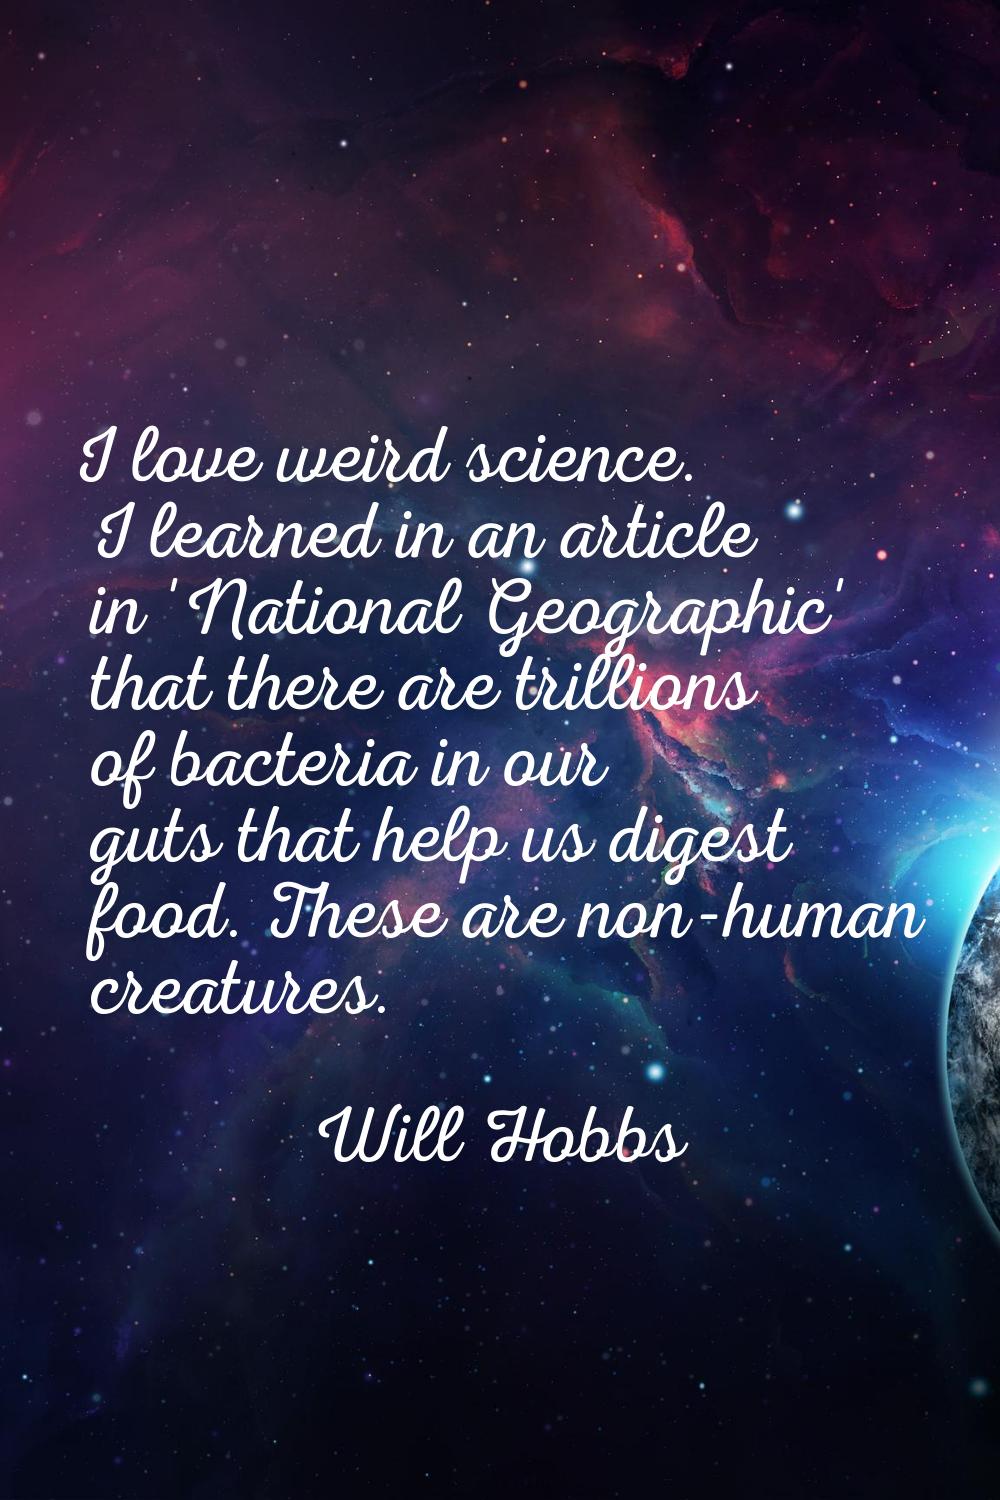 I love weird science. I learned in an article in 'National Geographic' that there are trillions of 